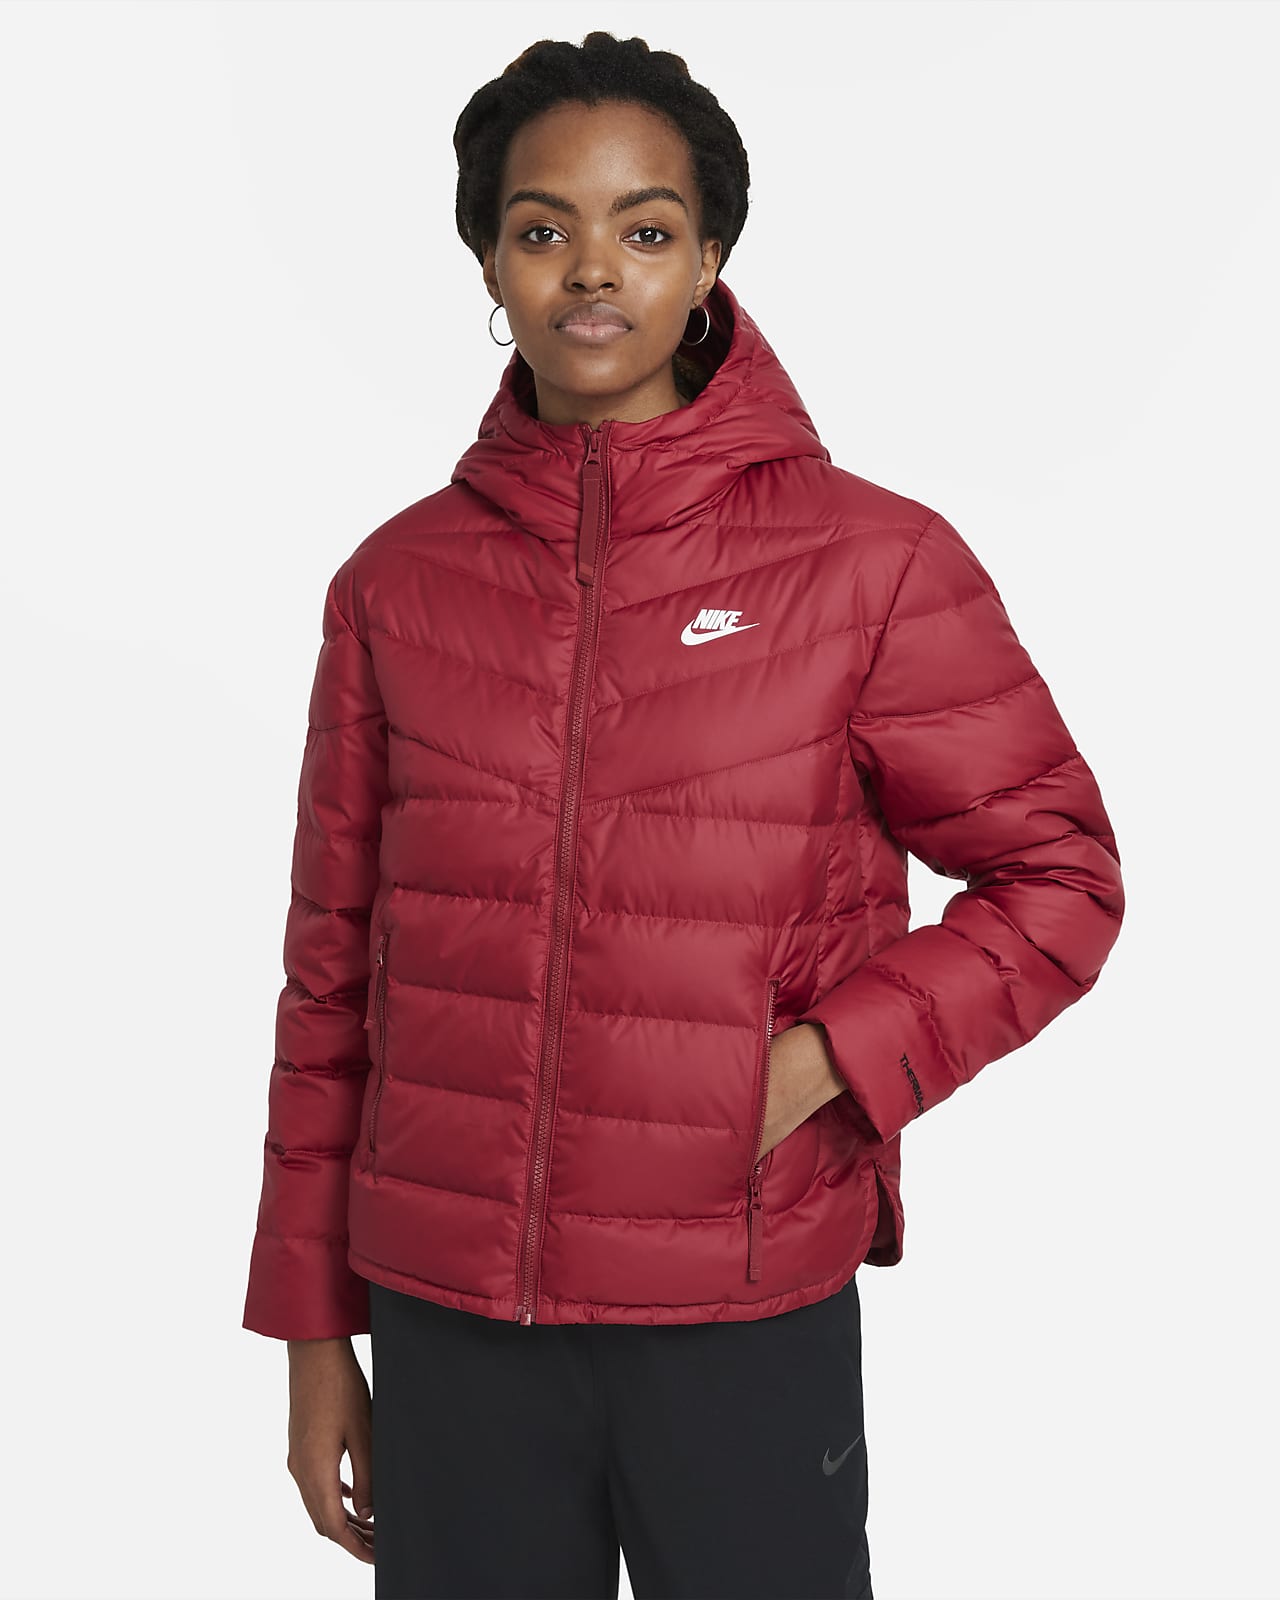 Email Ambicioso hipótesis Nike Sportswear Therma-FIT Repel Windrunner Women's Jacket. Nike.com